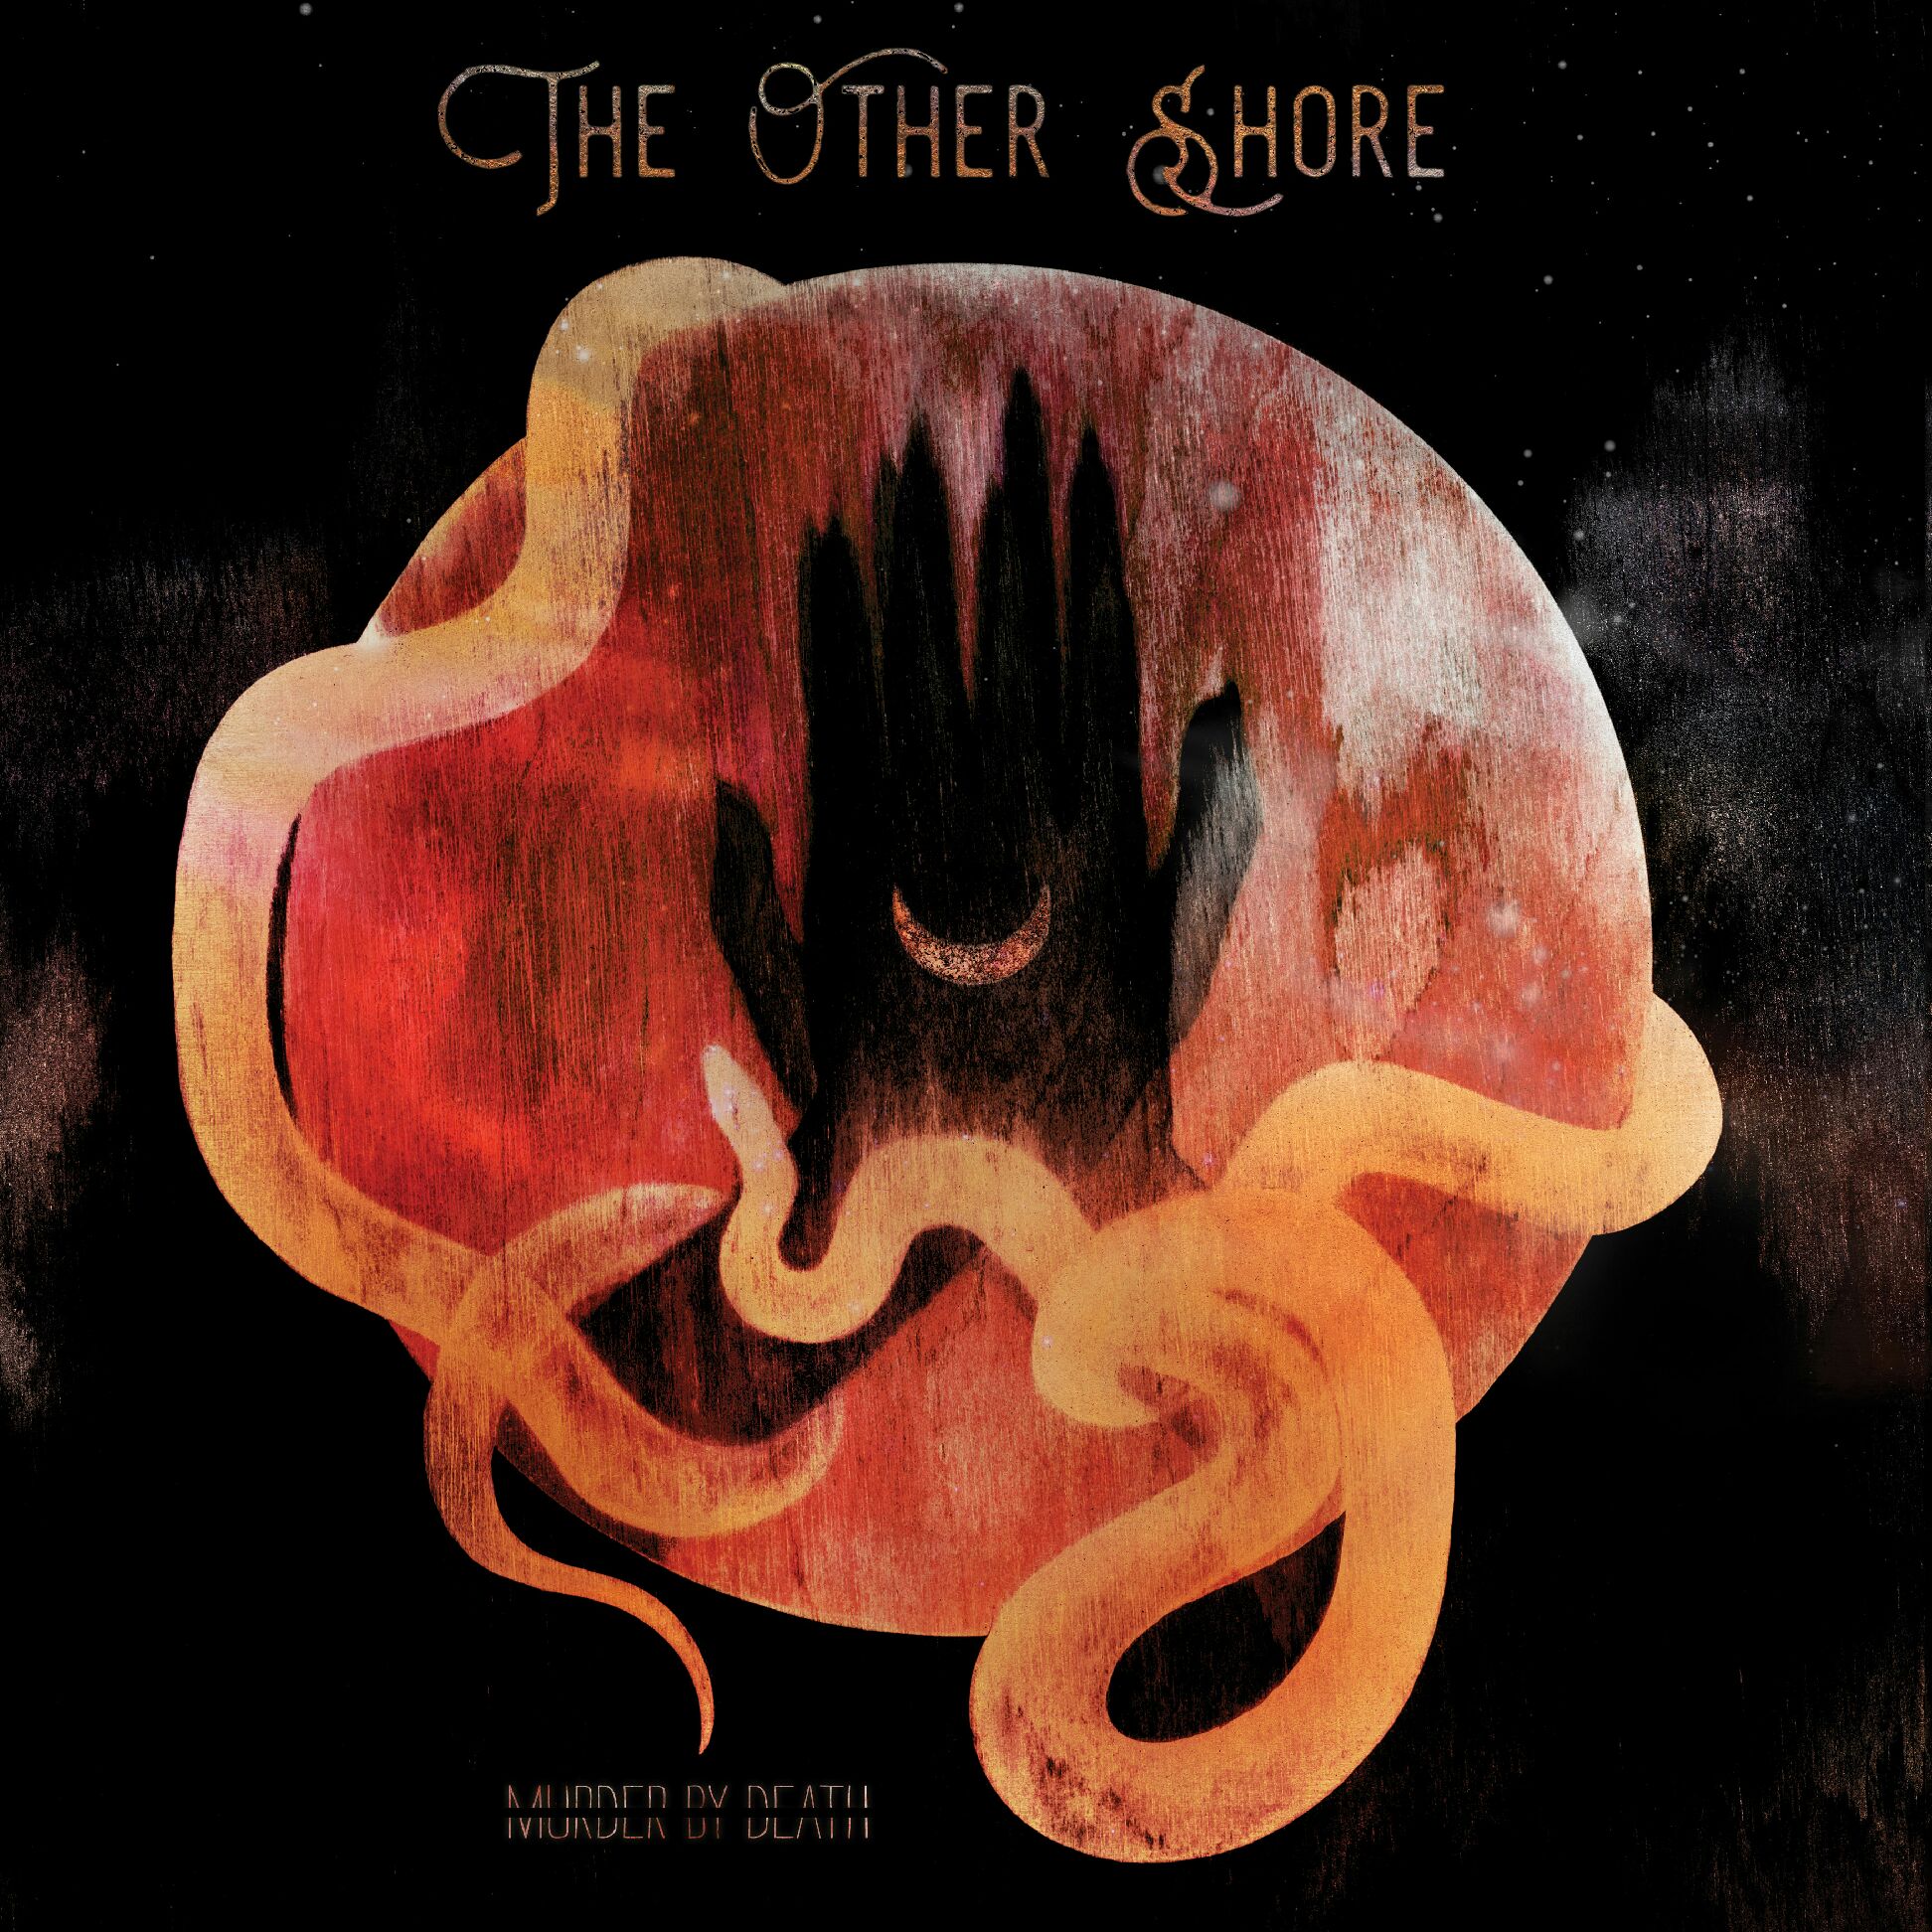 Murder By Death - The Other Shore - Album Cover Art_1.JPG